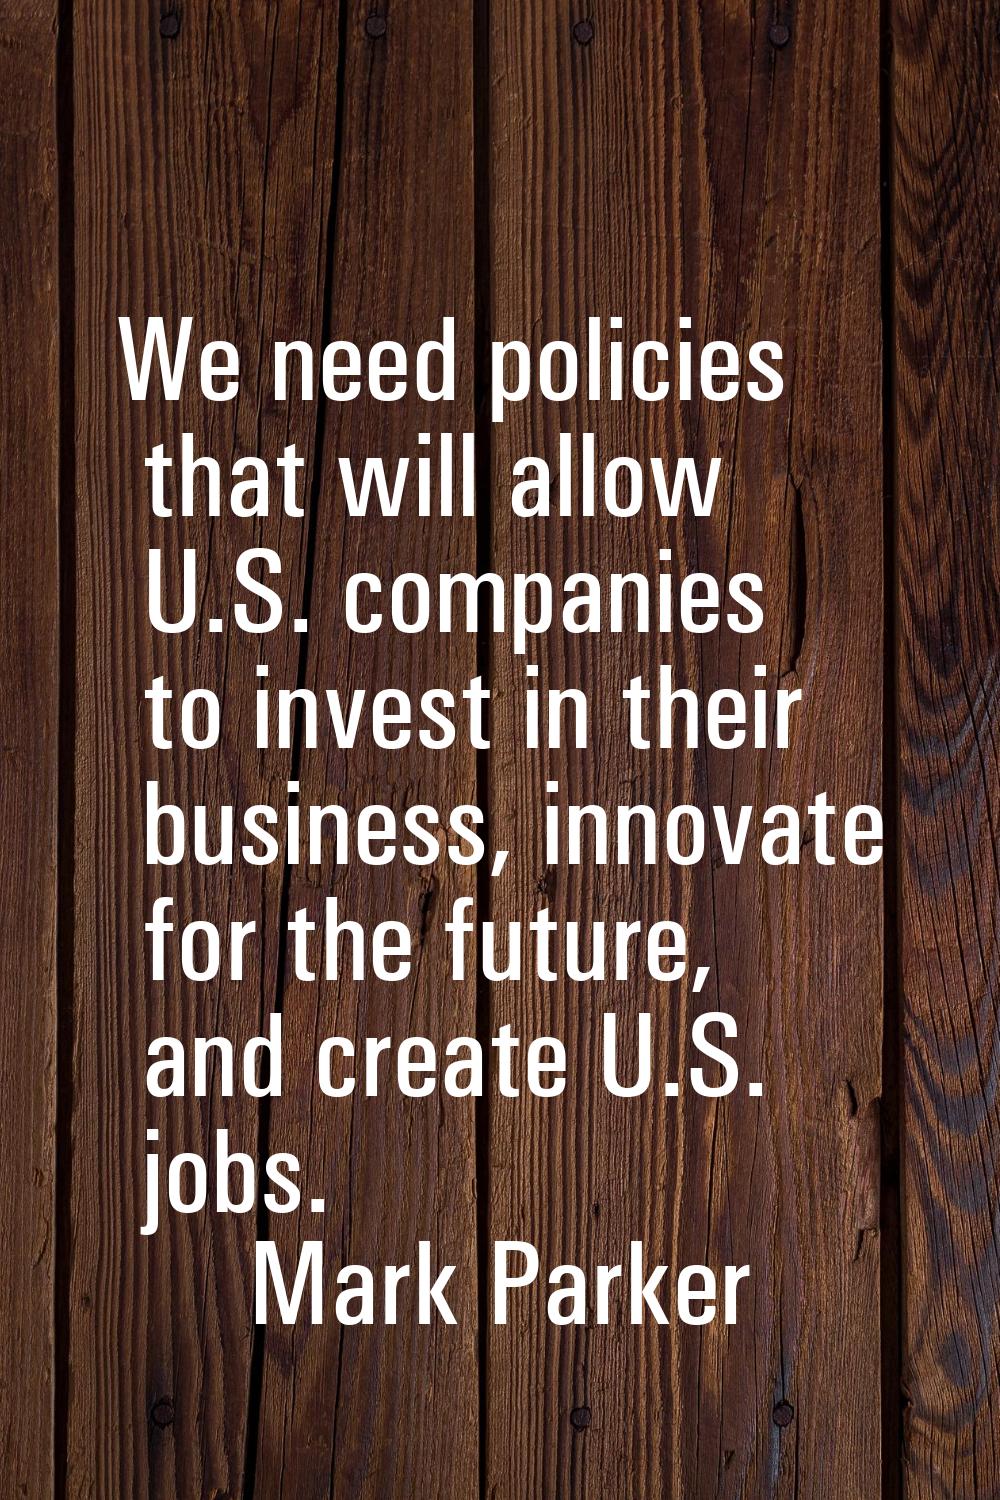 We need policies that will allow U.S. companies to invest in their business, innovate for the futur